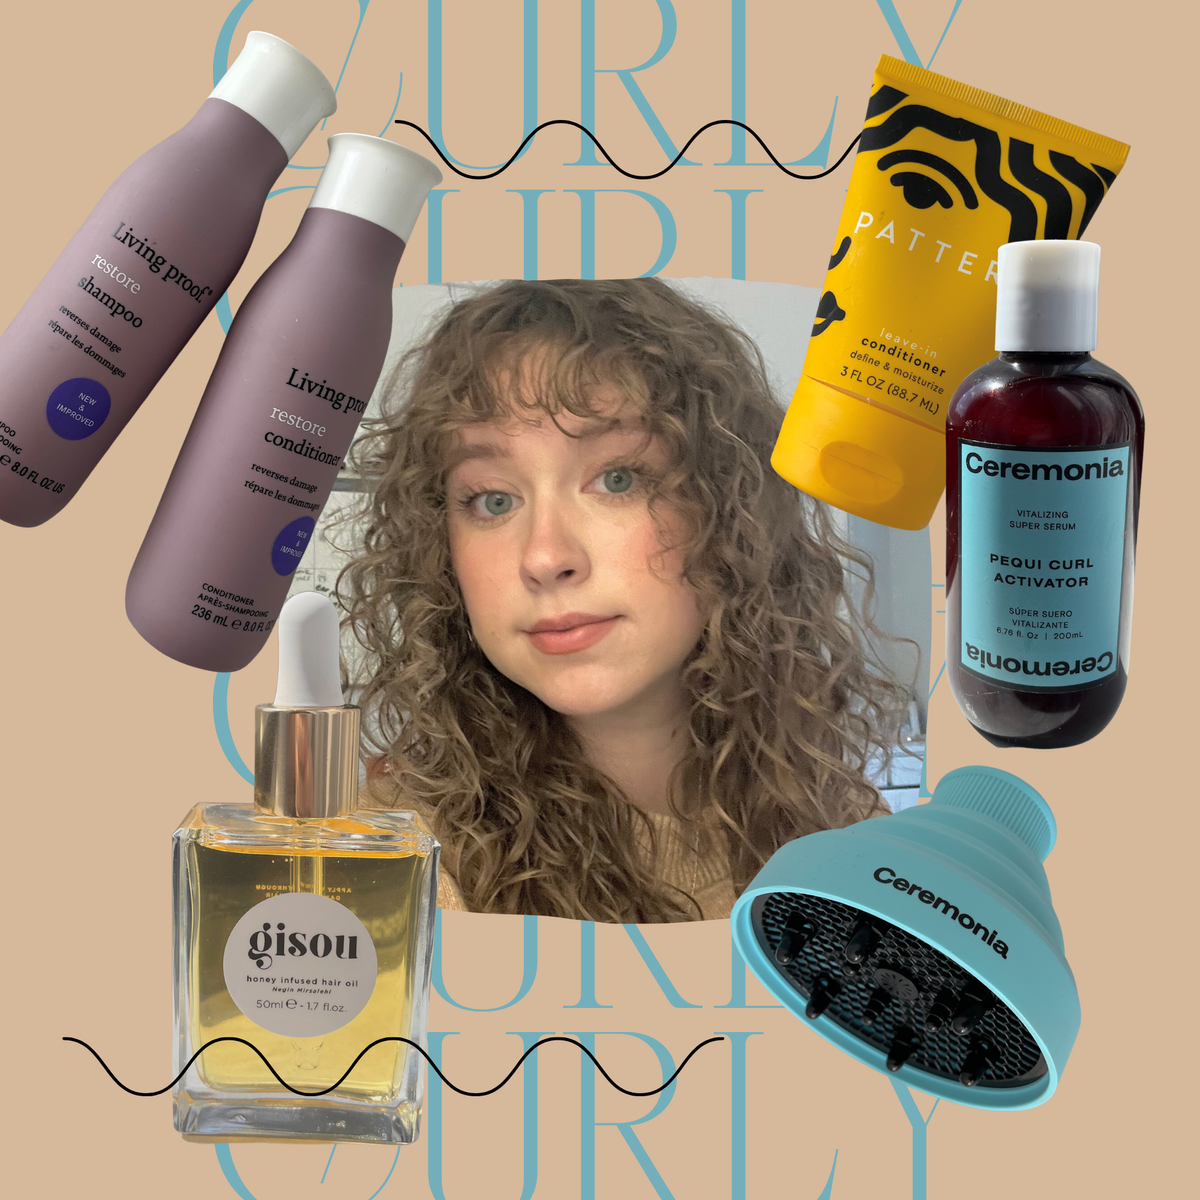 How to prevent frizzy curly hair – Gisou